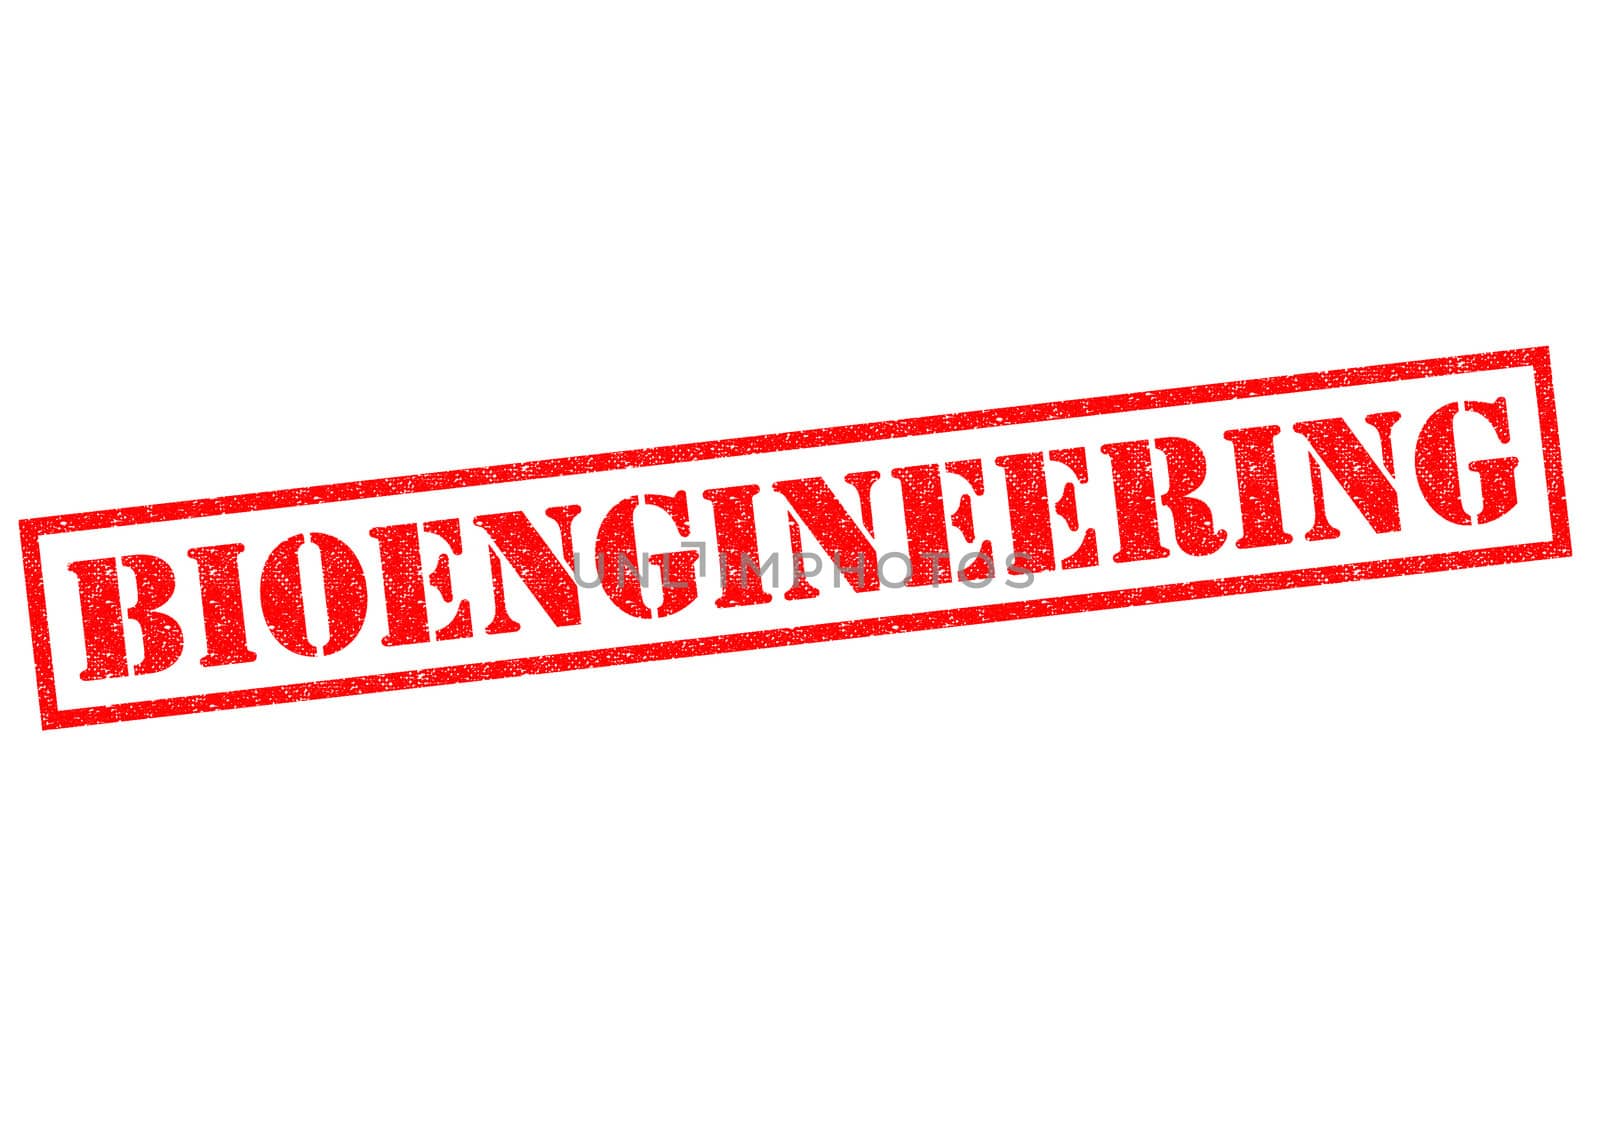 BIOENGINEERING red Rubber Stamp over a white background.